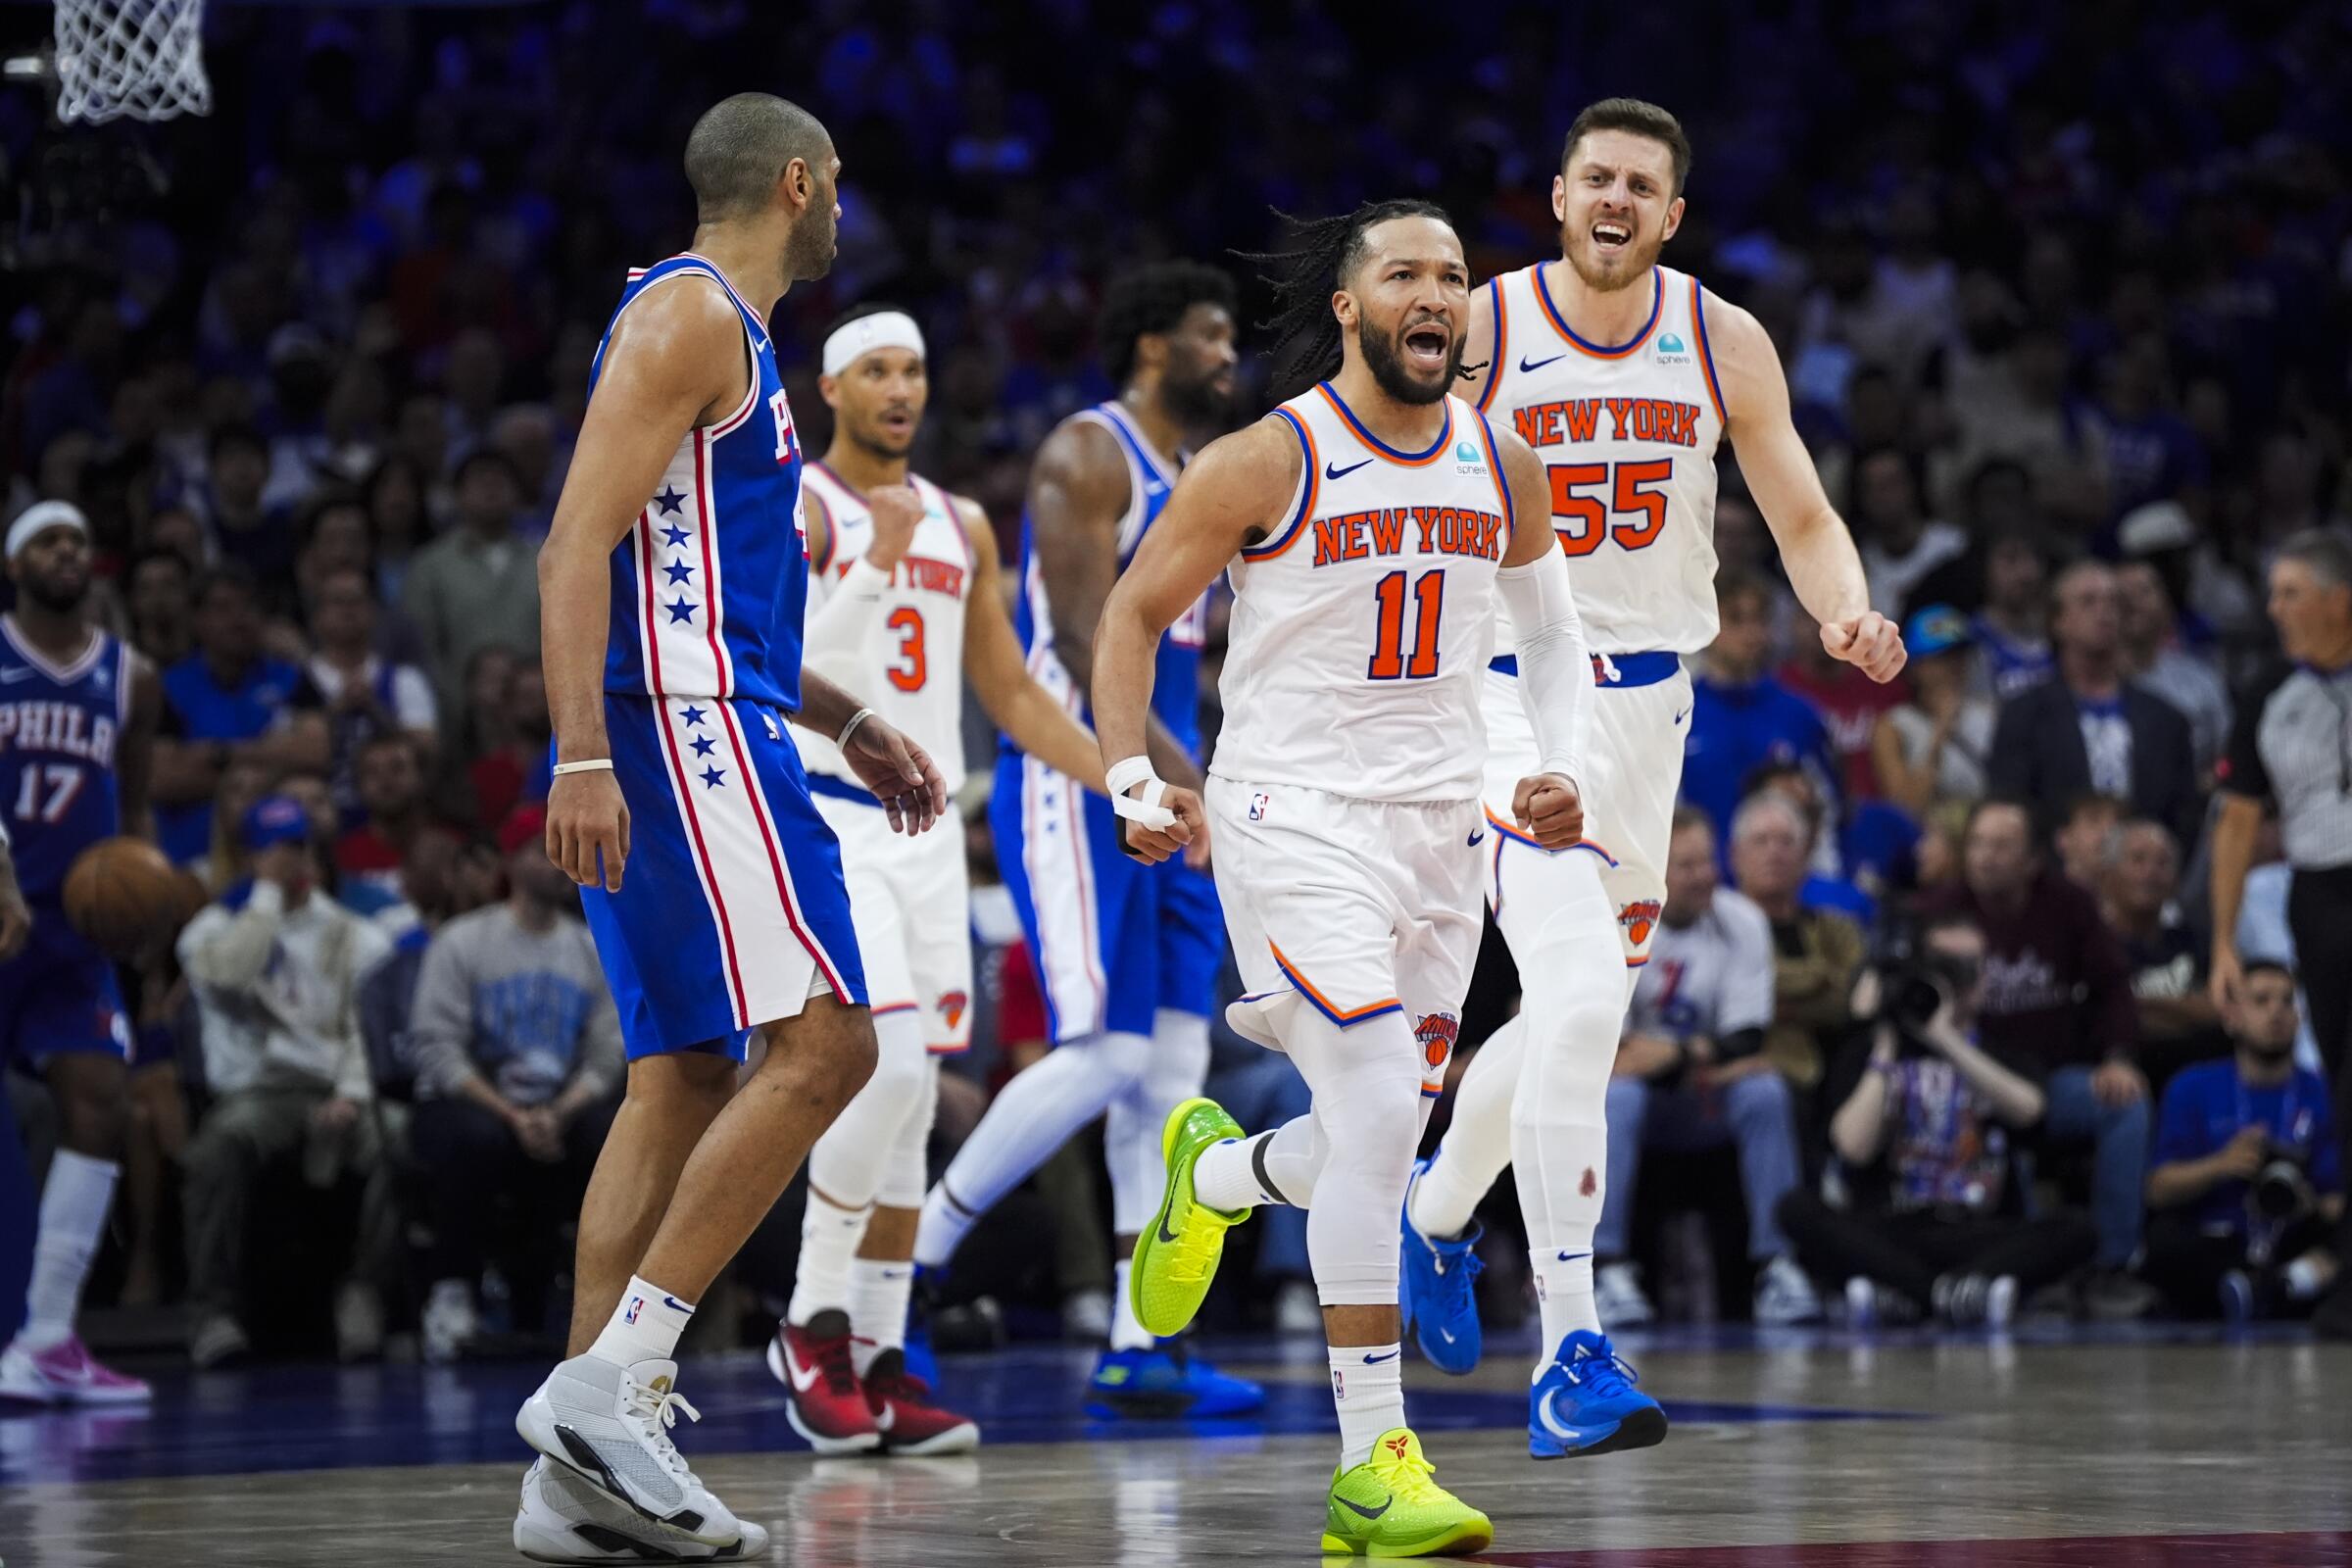 New York's Jalen Brunson (11) reacts during the Knicks' 118-115 victory over the Philadelphia 76ers.